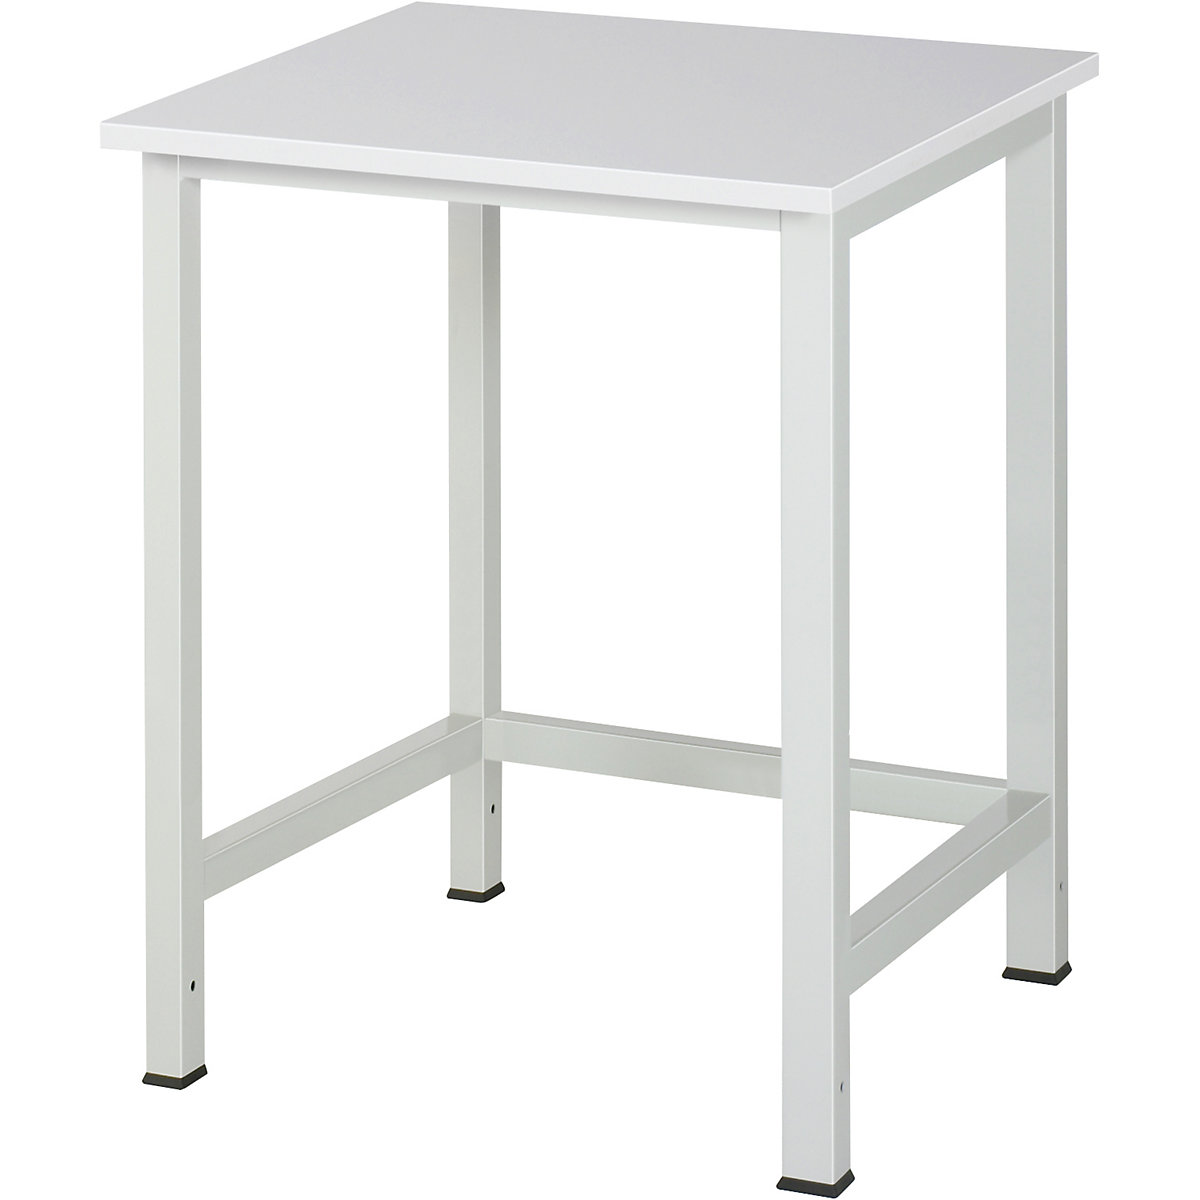 Work table for workstation system – RAU